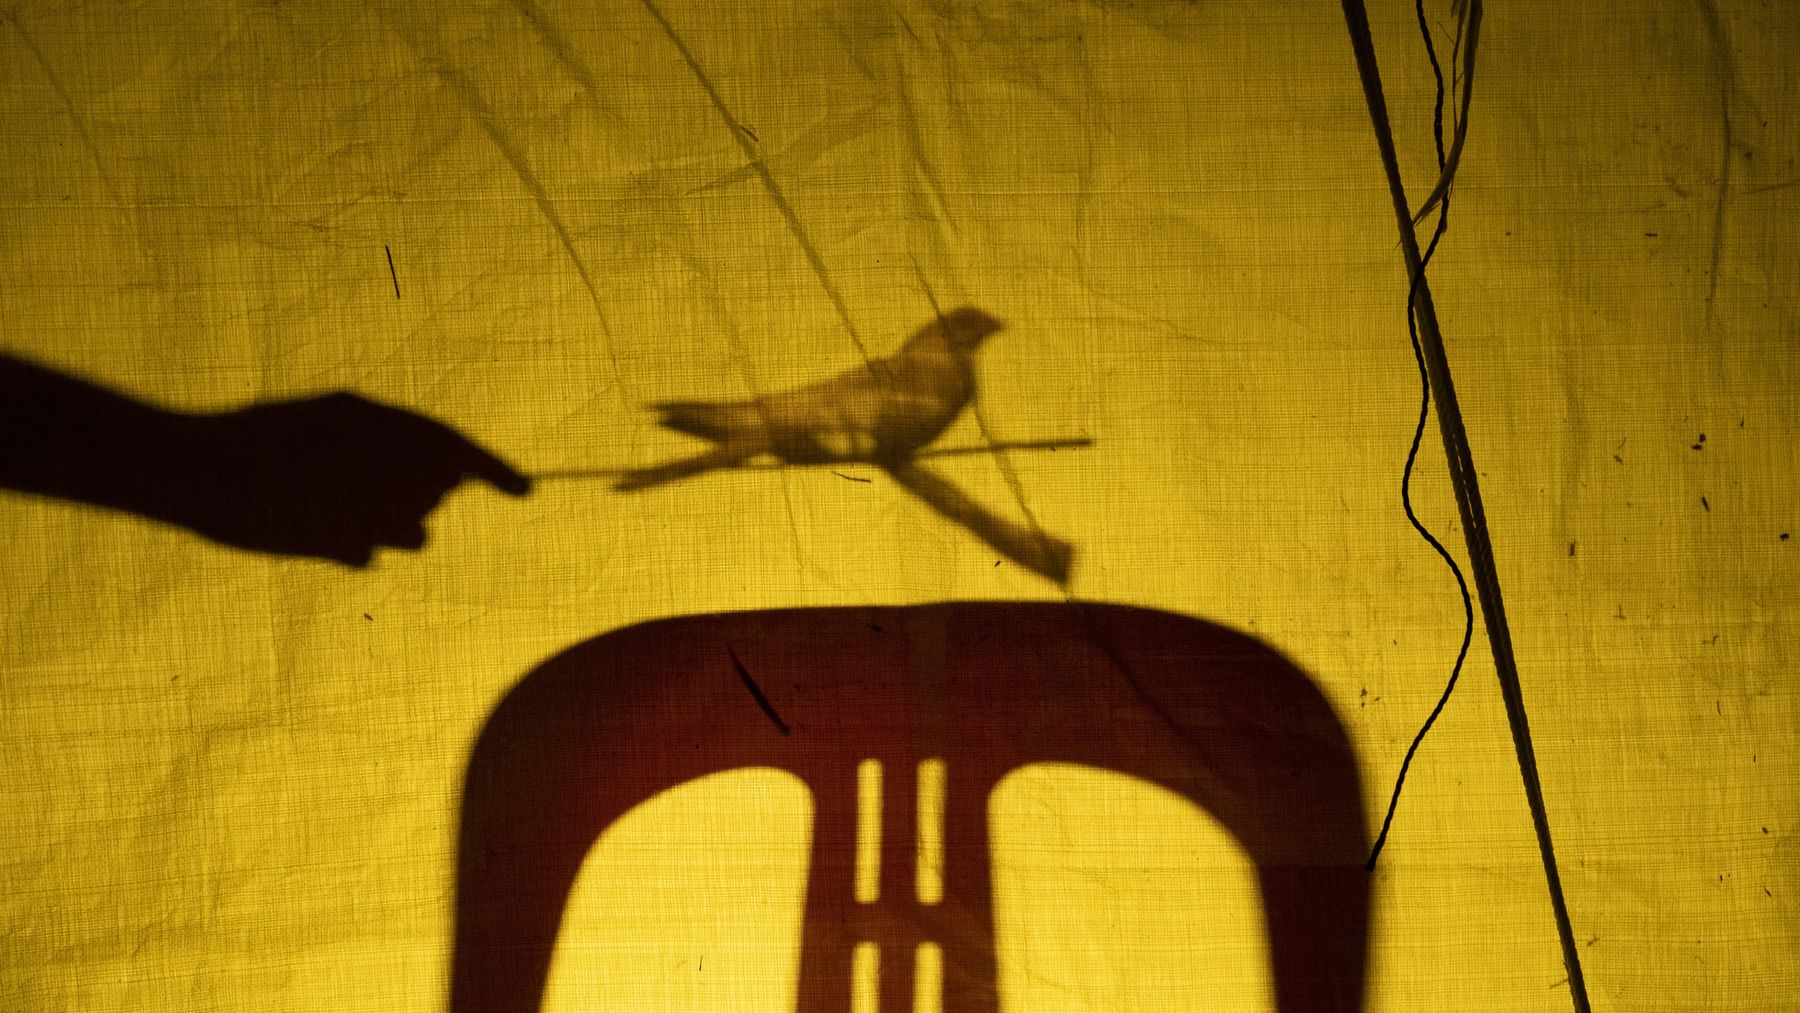 A screenshot from the film with shadows of a chair and a hand projected on a yellow fabric